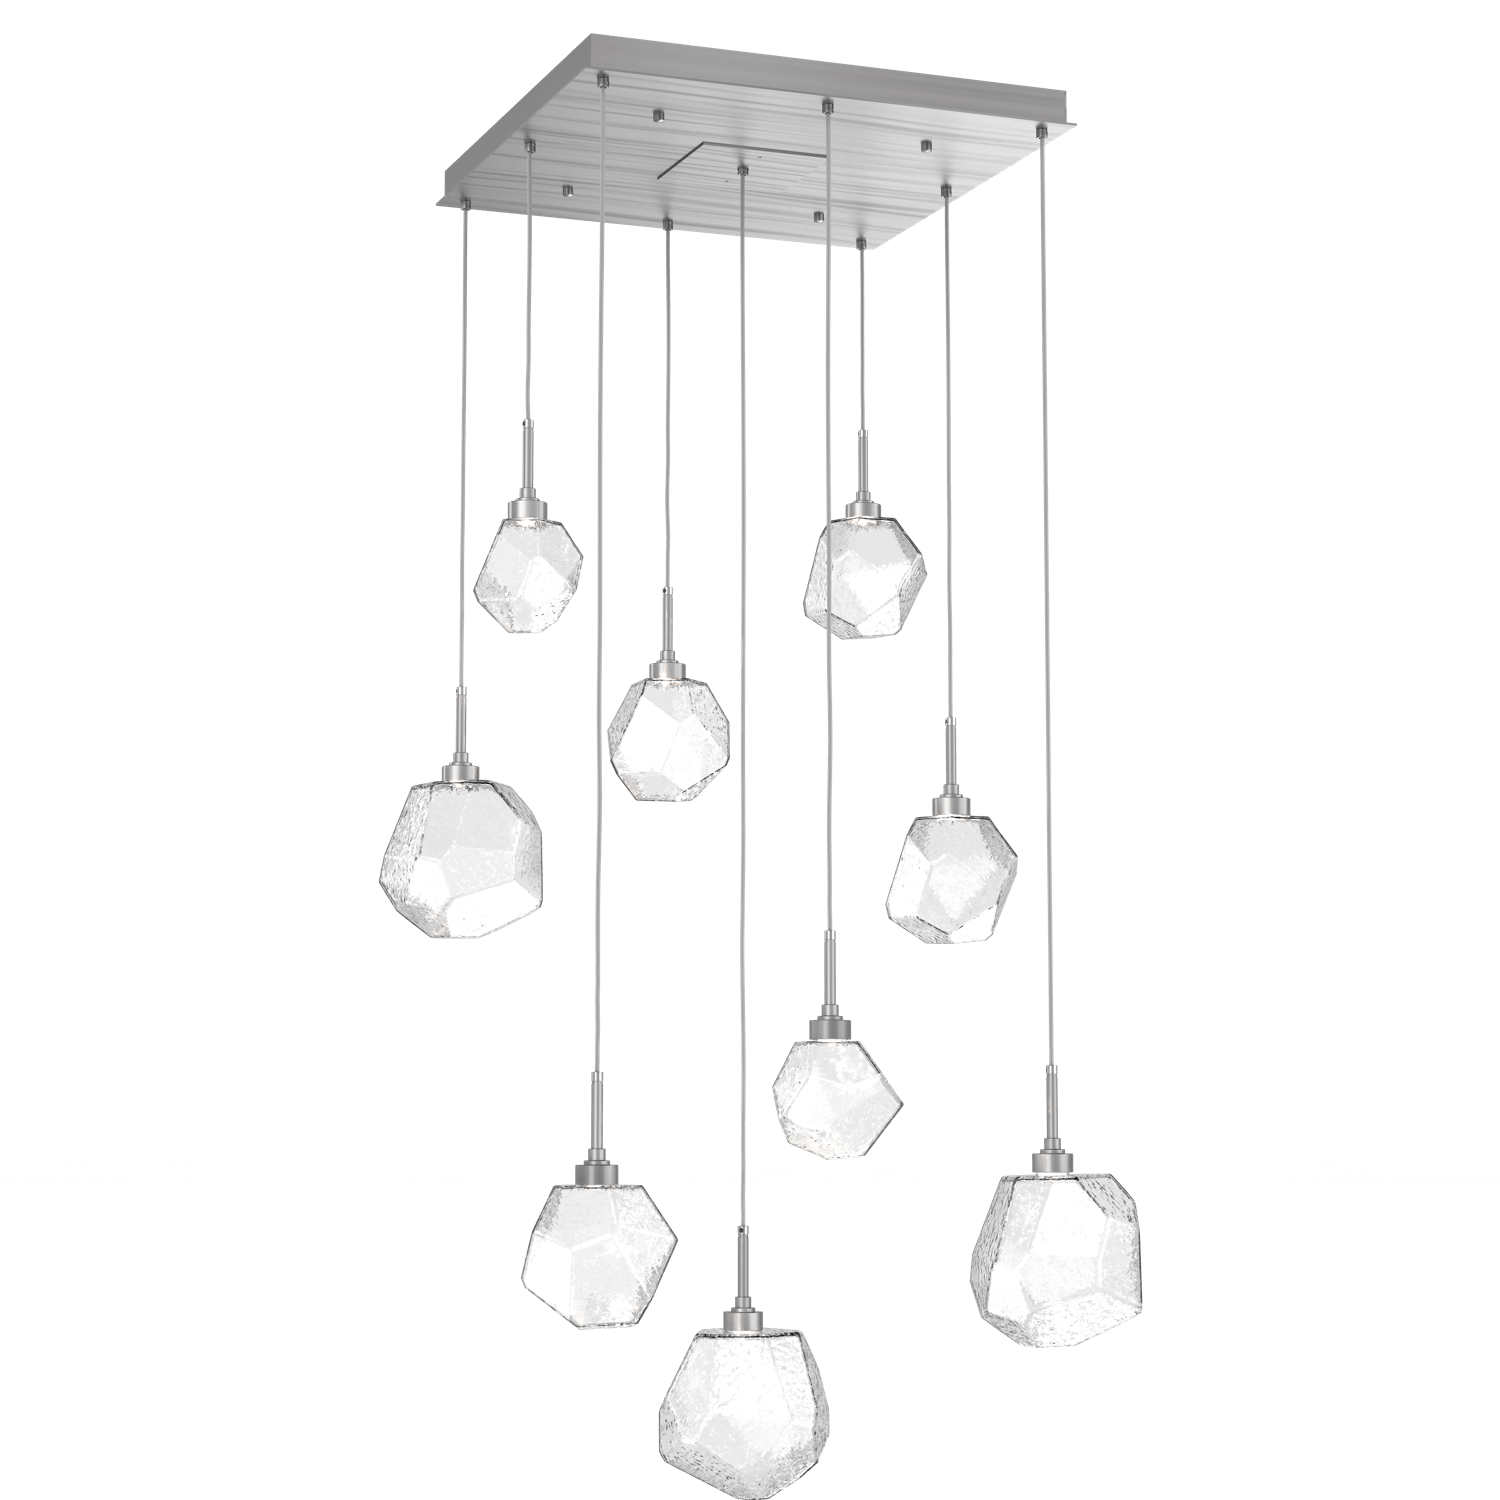 CHB0039-09-SN-C-Hammerton-Studio-Gem-9-light-square-pendant-chandelier-with-satin-nickel-finish-and-clear-blown-glass-shades-and-LED-lamping